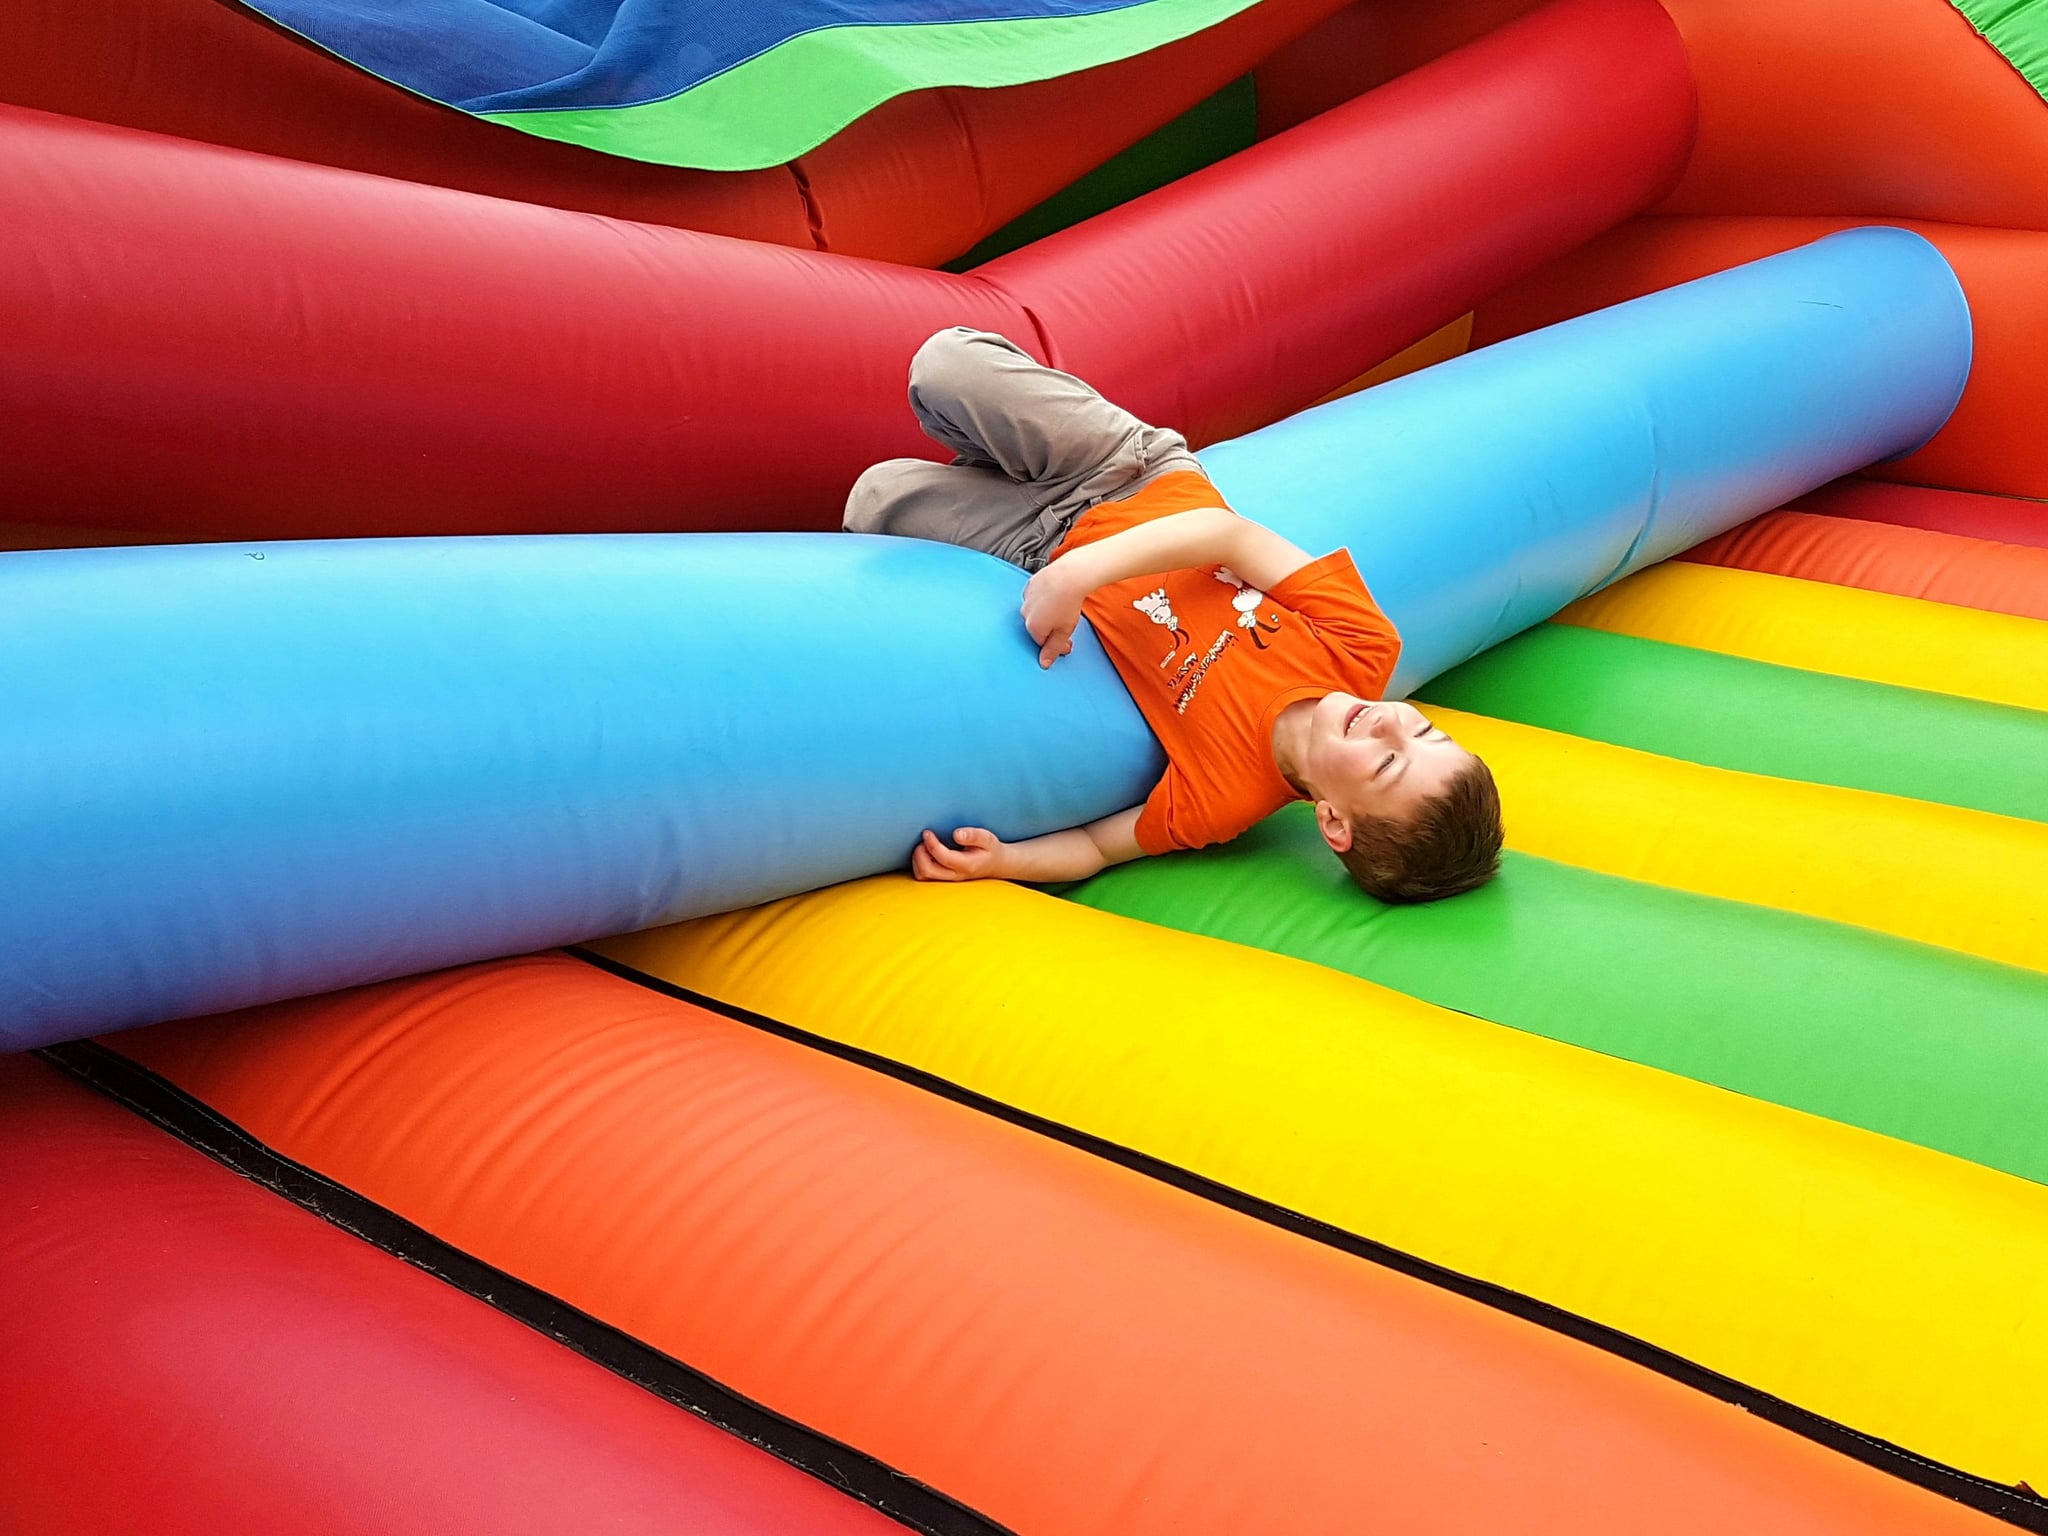 776 Bouncy Castle Stock Photos, Pictures & Royalty-Free Images - iStock